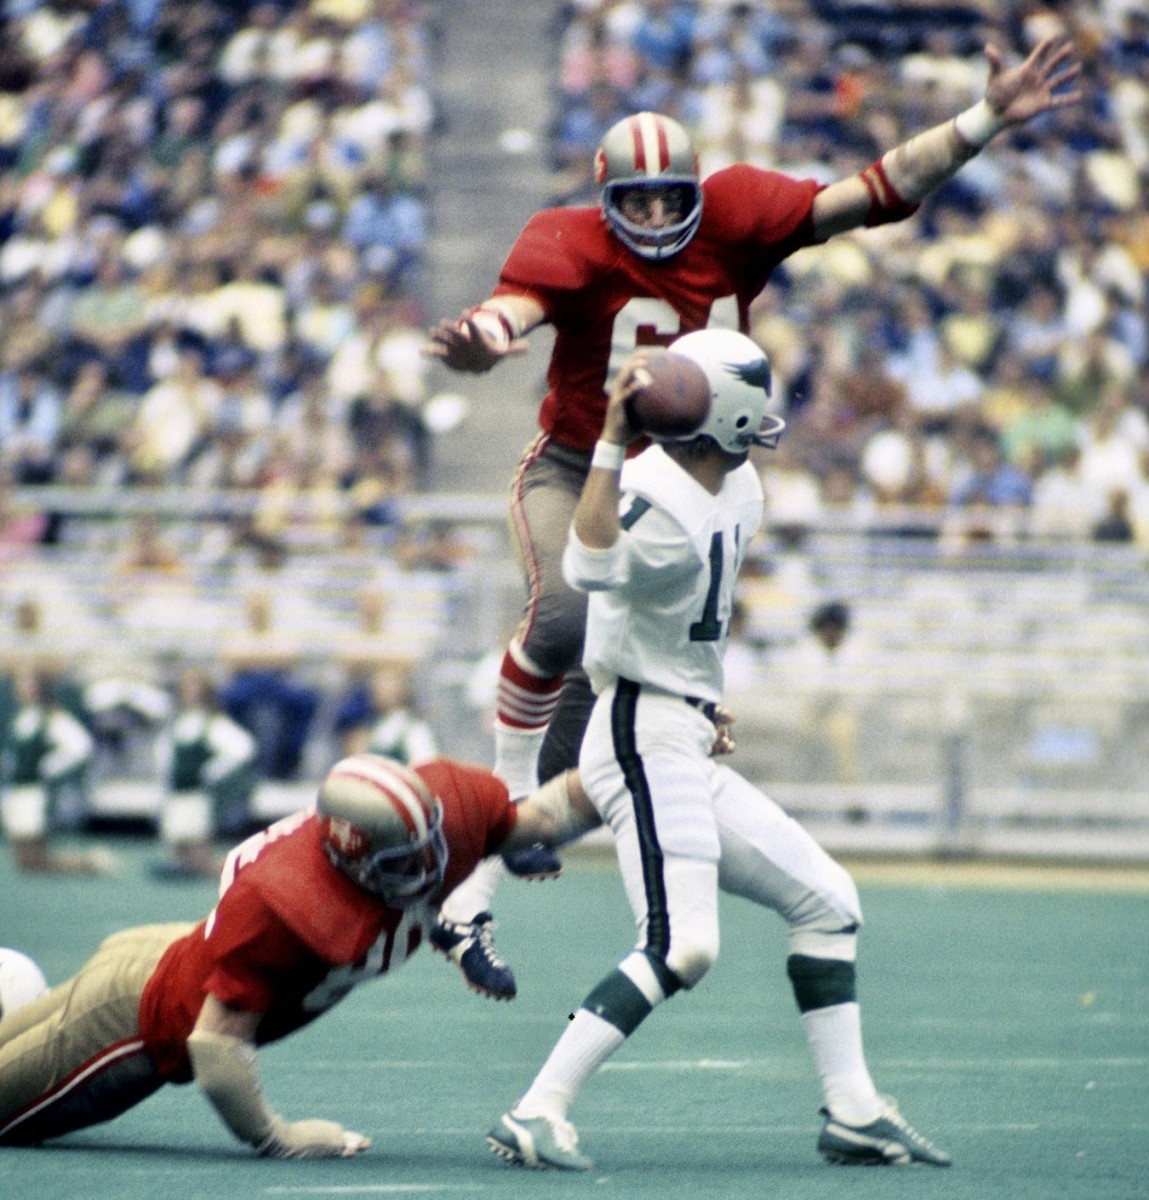 Dave Wilcox, Hall of Famer who played for 49ers, dead at 80